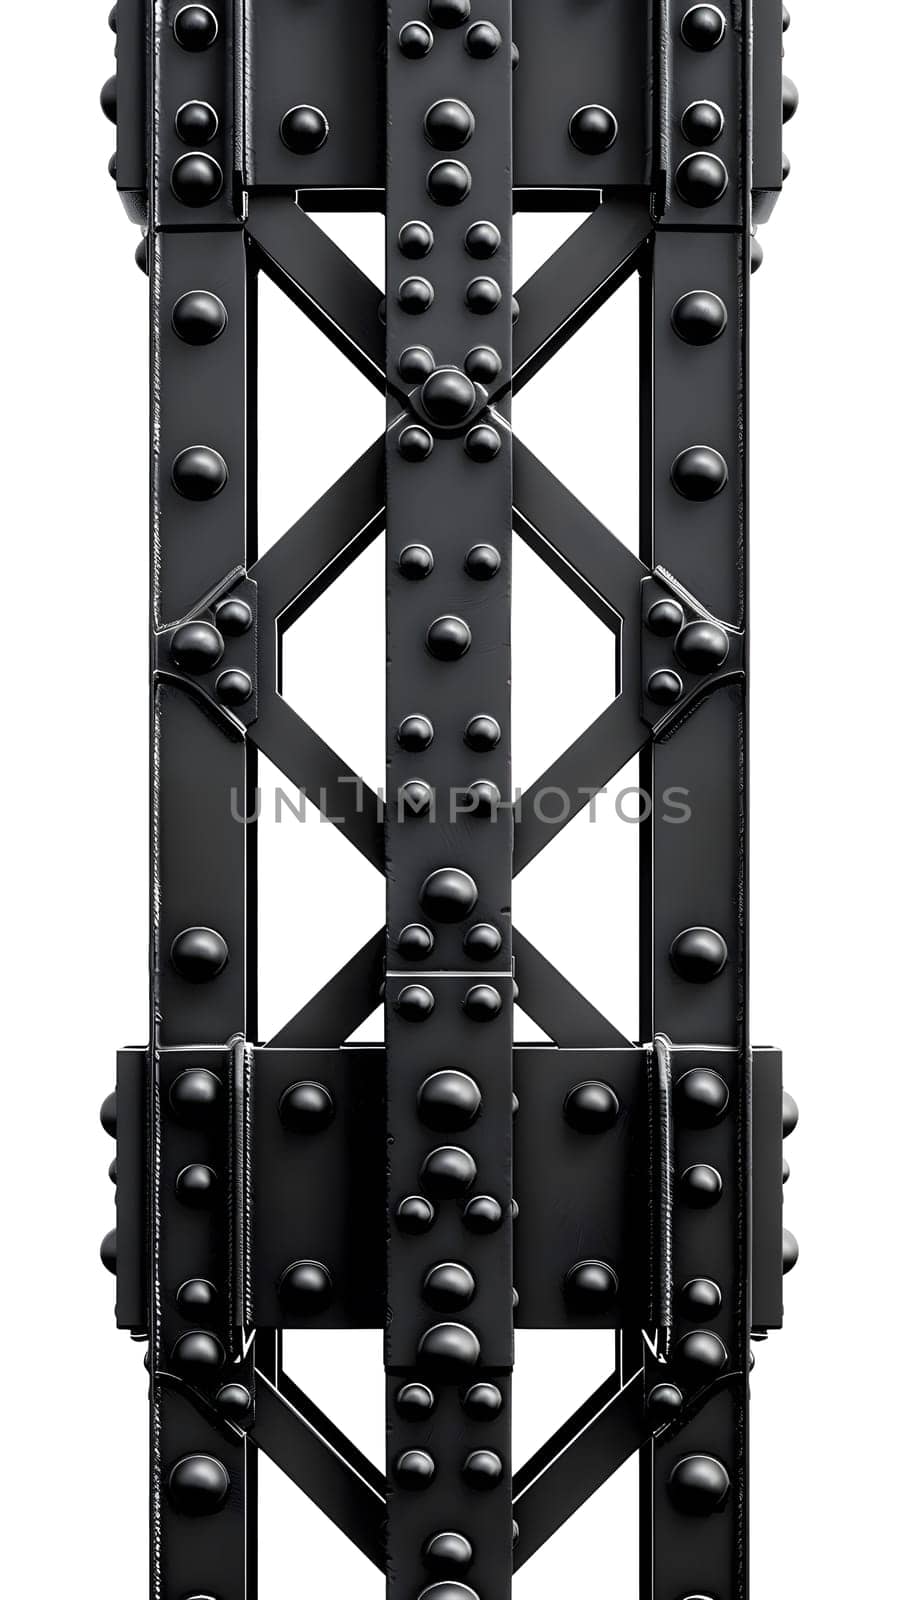 A close up photo showcasing a black metal rectangle with a symmetrical pattern on a white background. Resembling a bridge or automotive wheel system component